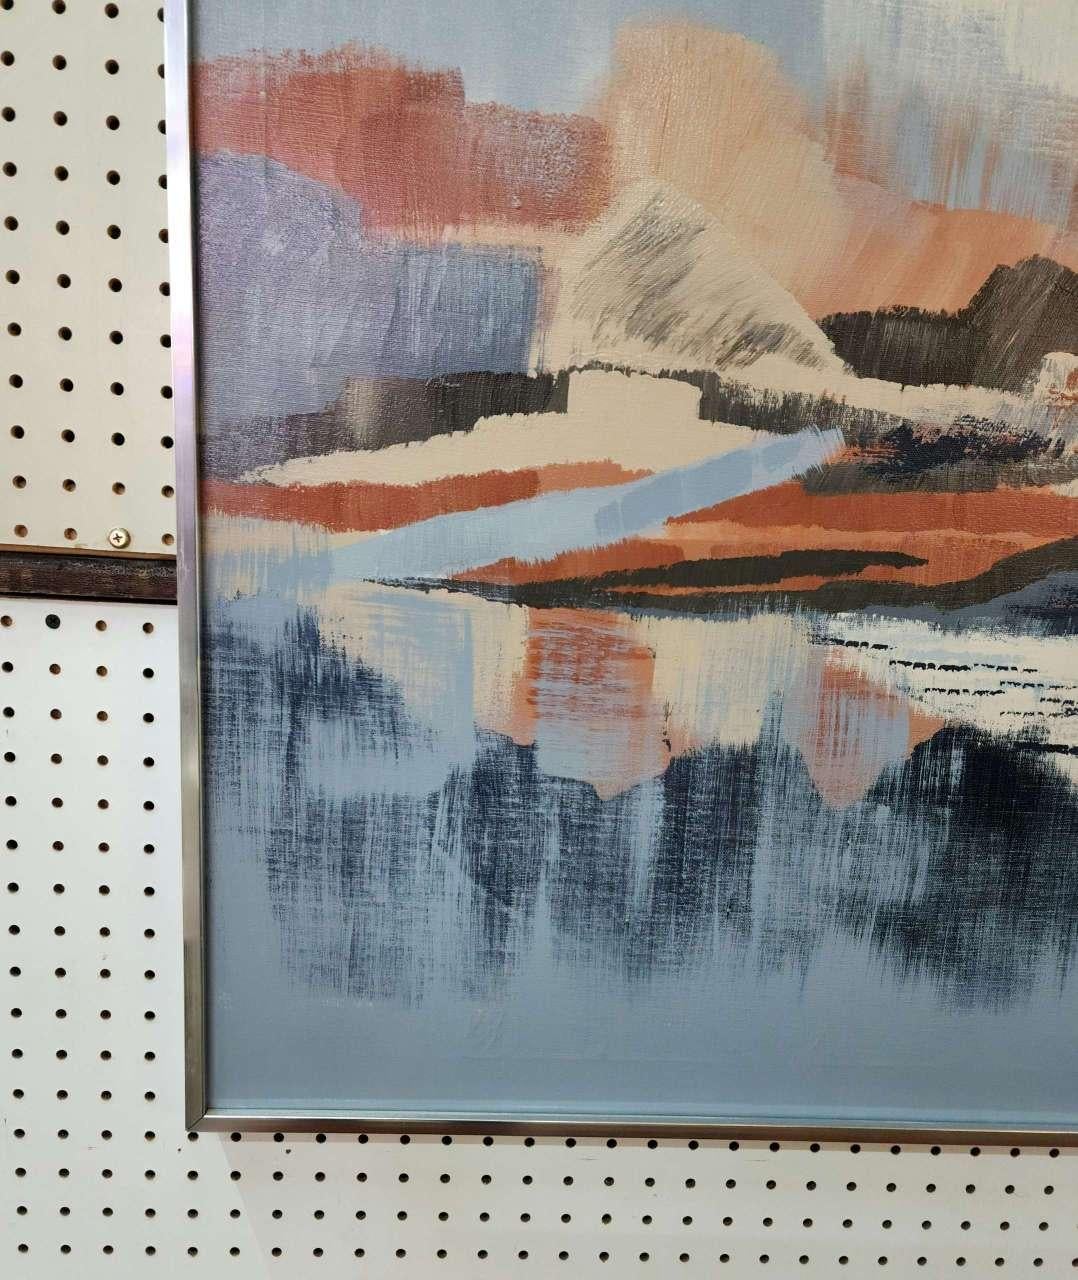 Large Abstract Landscape Painting by Lee Reynolds with Blues, Oranges, Pastels 10